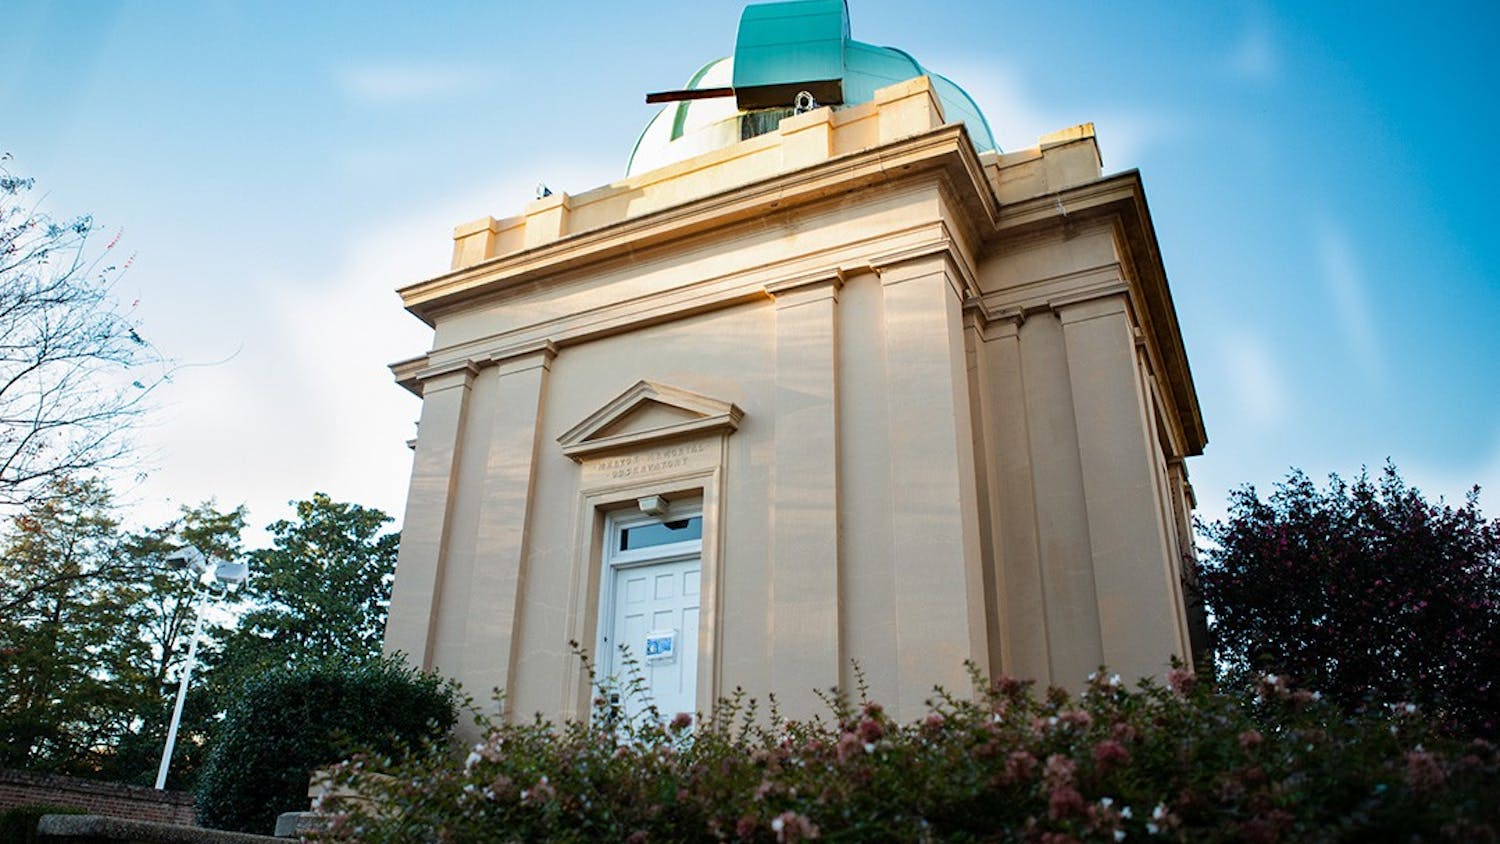 The sun sets over the Melton Observatory on Greene Street on a clear evening.&nbsp;The observatory telescope is open to the public on Monday from 7 p.m. to 9 p.m., and students from all majors volunteer to maintain the instrument that can capture distant planets and stars.